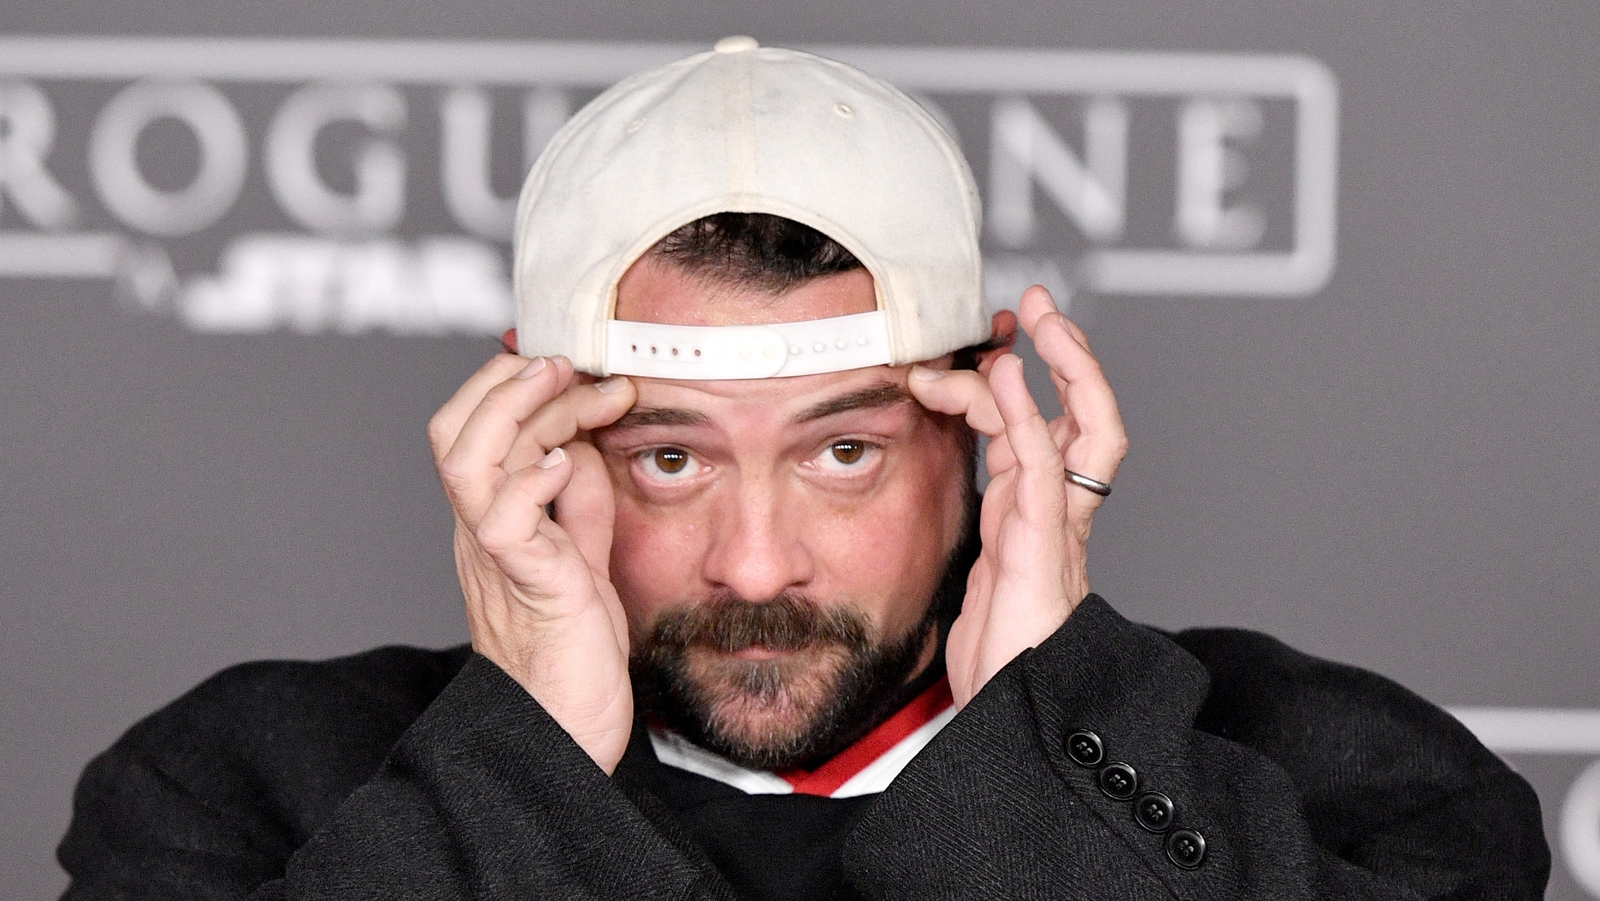 Kevin Smith: Having a heart attack was the best thing that ever